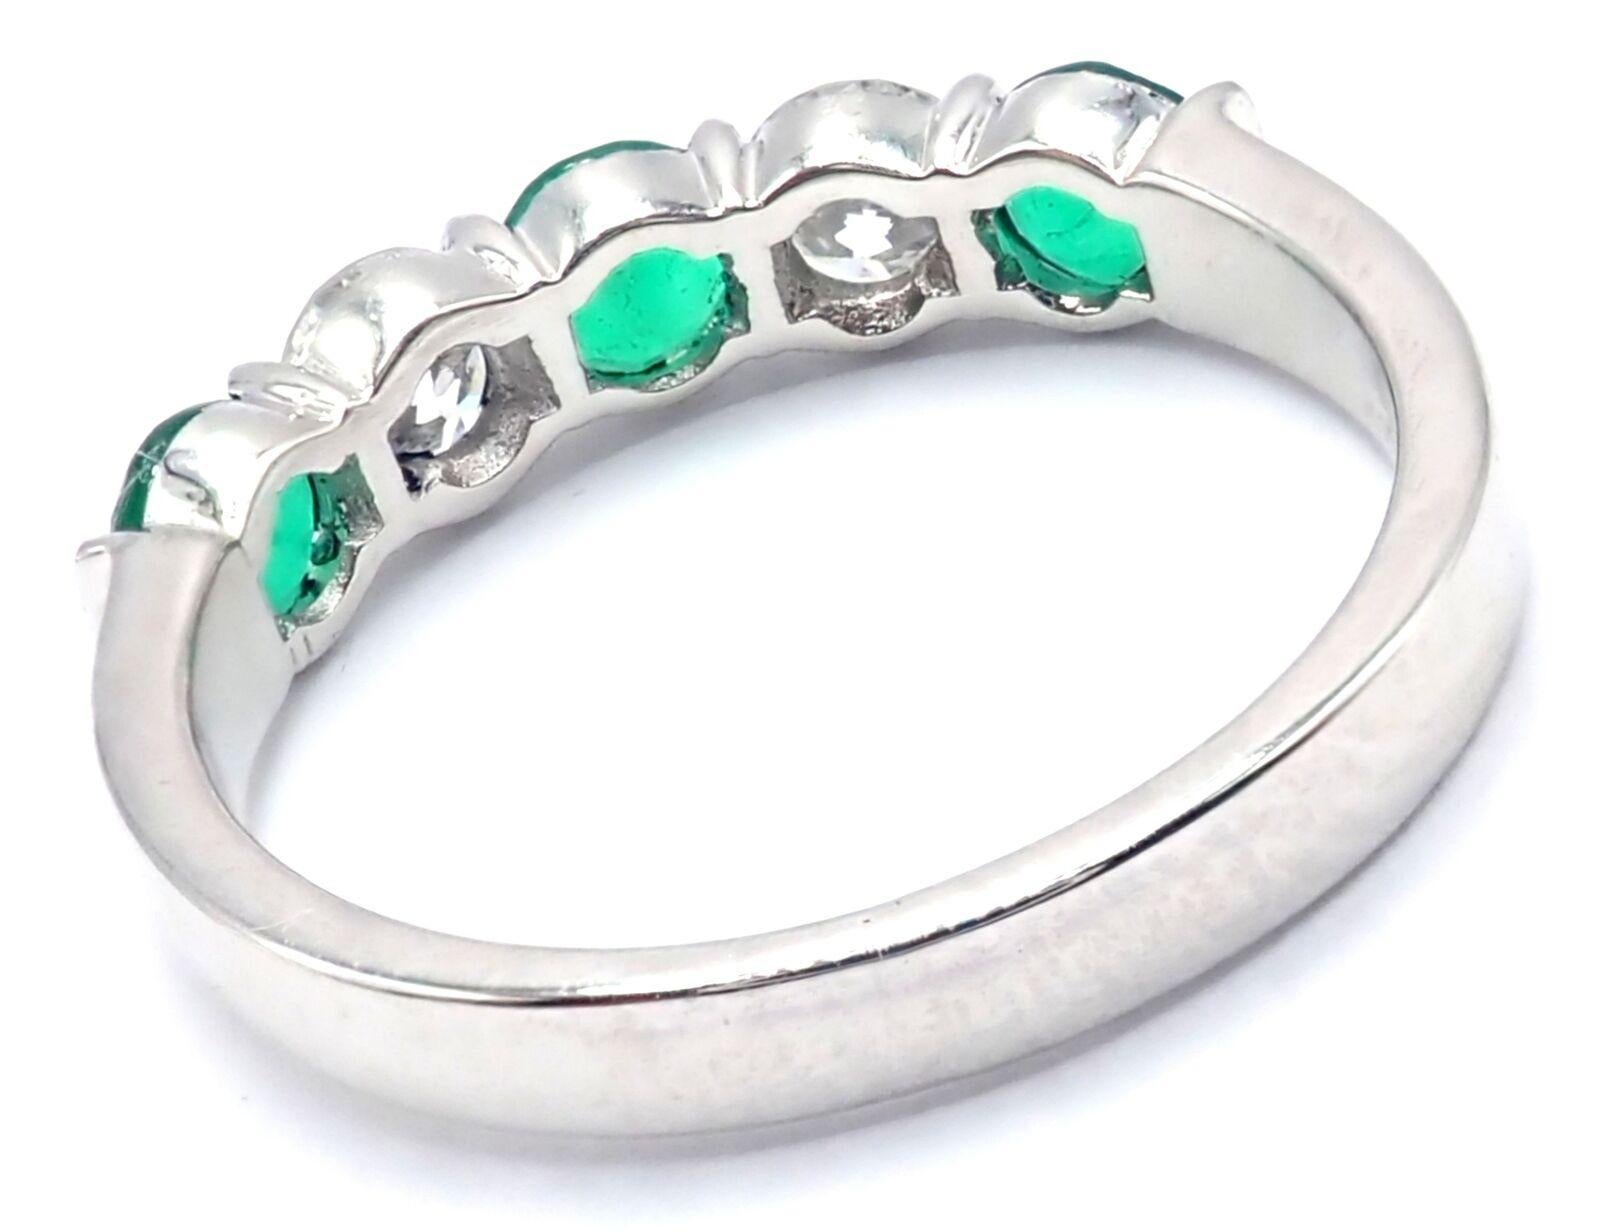 Platinum Diamond And Emerald Band Ring by Tiffany & Co.
With 2 Round brilliant cut diamonds VS1 clarity, E color total weight approximately .50ct
3 Round emeralds total weight approximately .75ct
Measurements: 
Ring Size: 5.5
Weight: 3.9 grams
Band